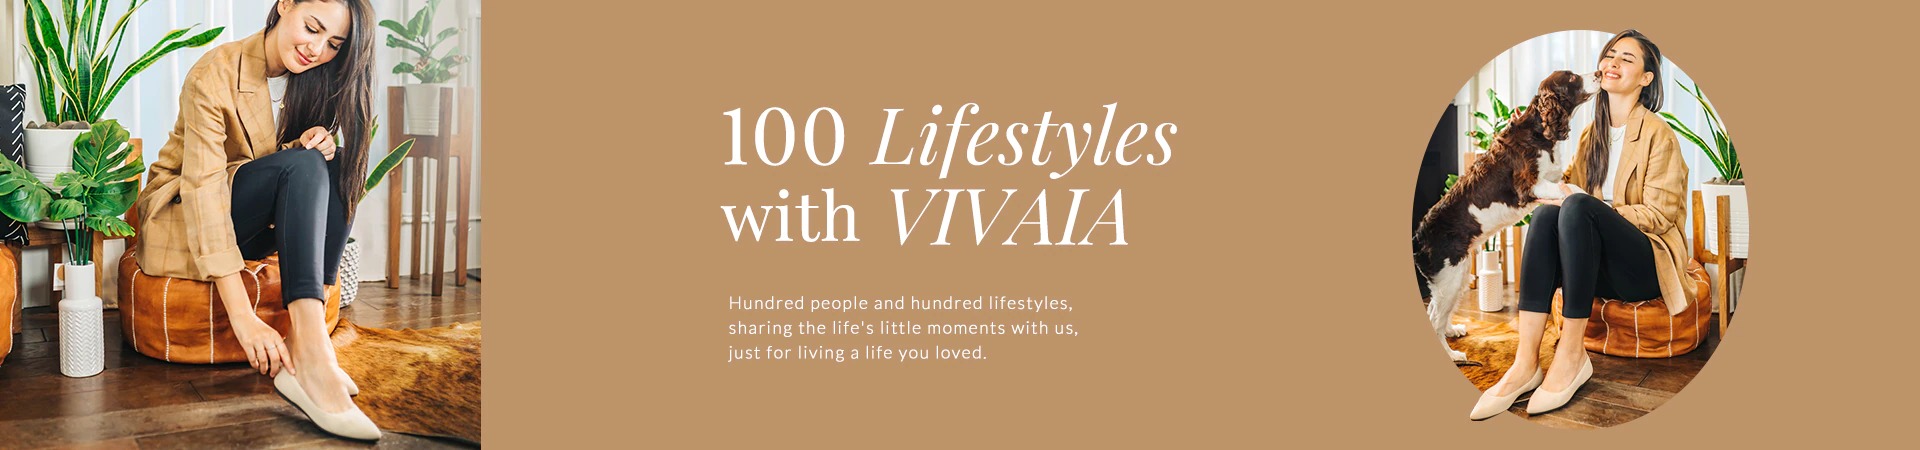 Hundred Lifestyles with VIVAIA